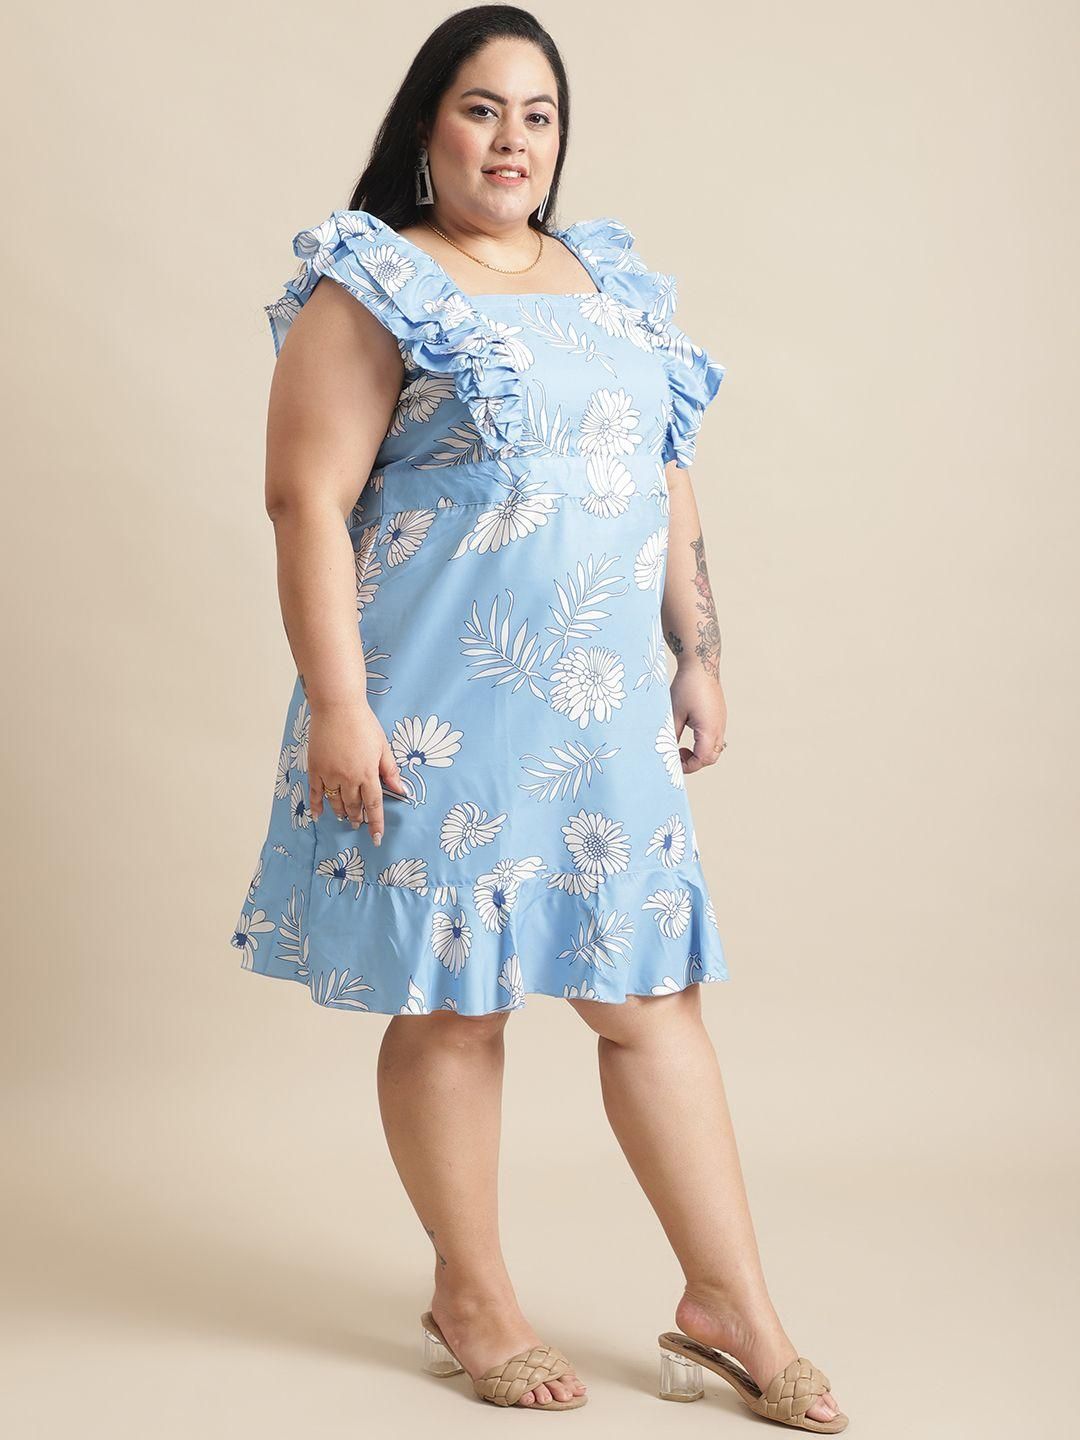 Flambeur Plus Size Blue Floral Flared Short Dress for Women